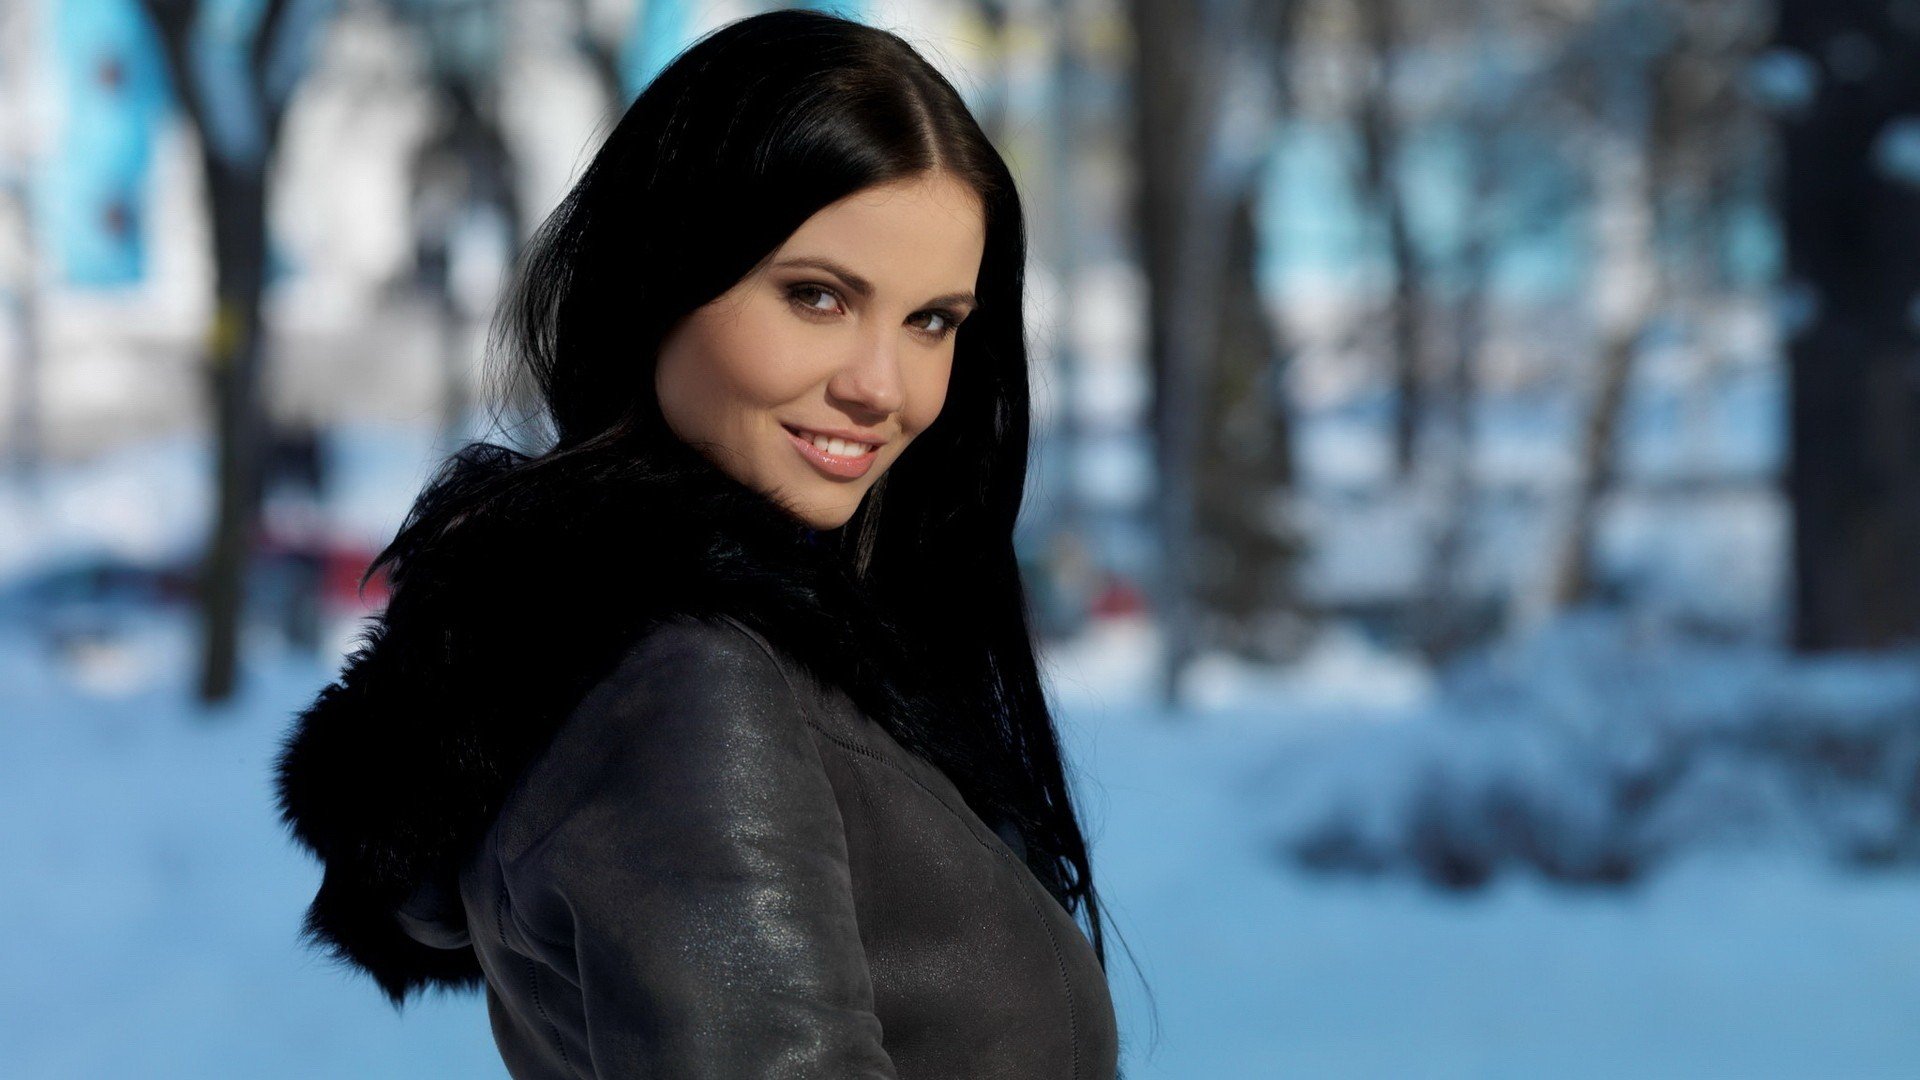 Women Model Brunette Long Hair Women Outdoors Nature Dark Hair Brown Eyes Smiling Looking At Viewer Coats Winter Snow Trees Hd Wallpapers Desktop And Mobile Images Photos